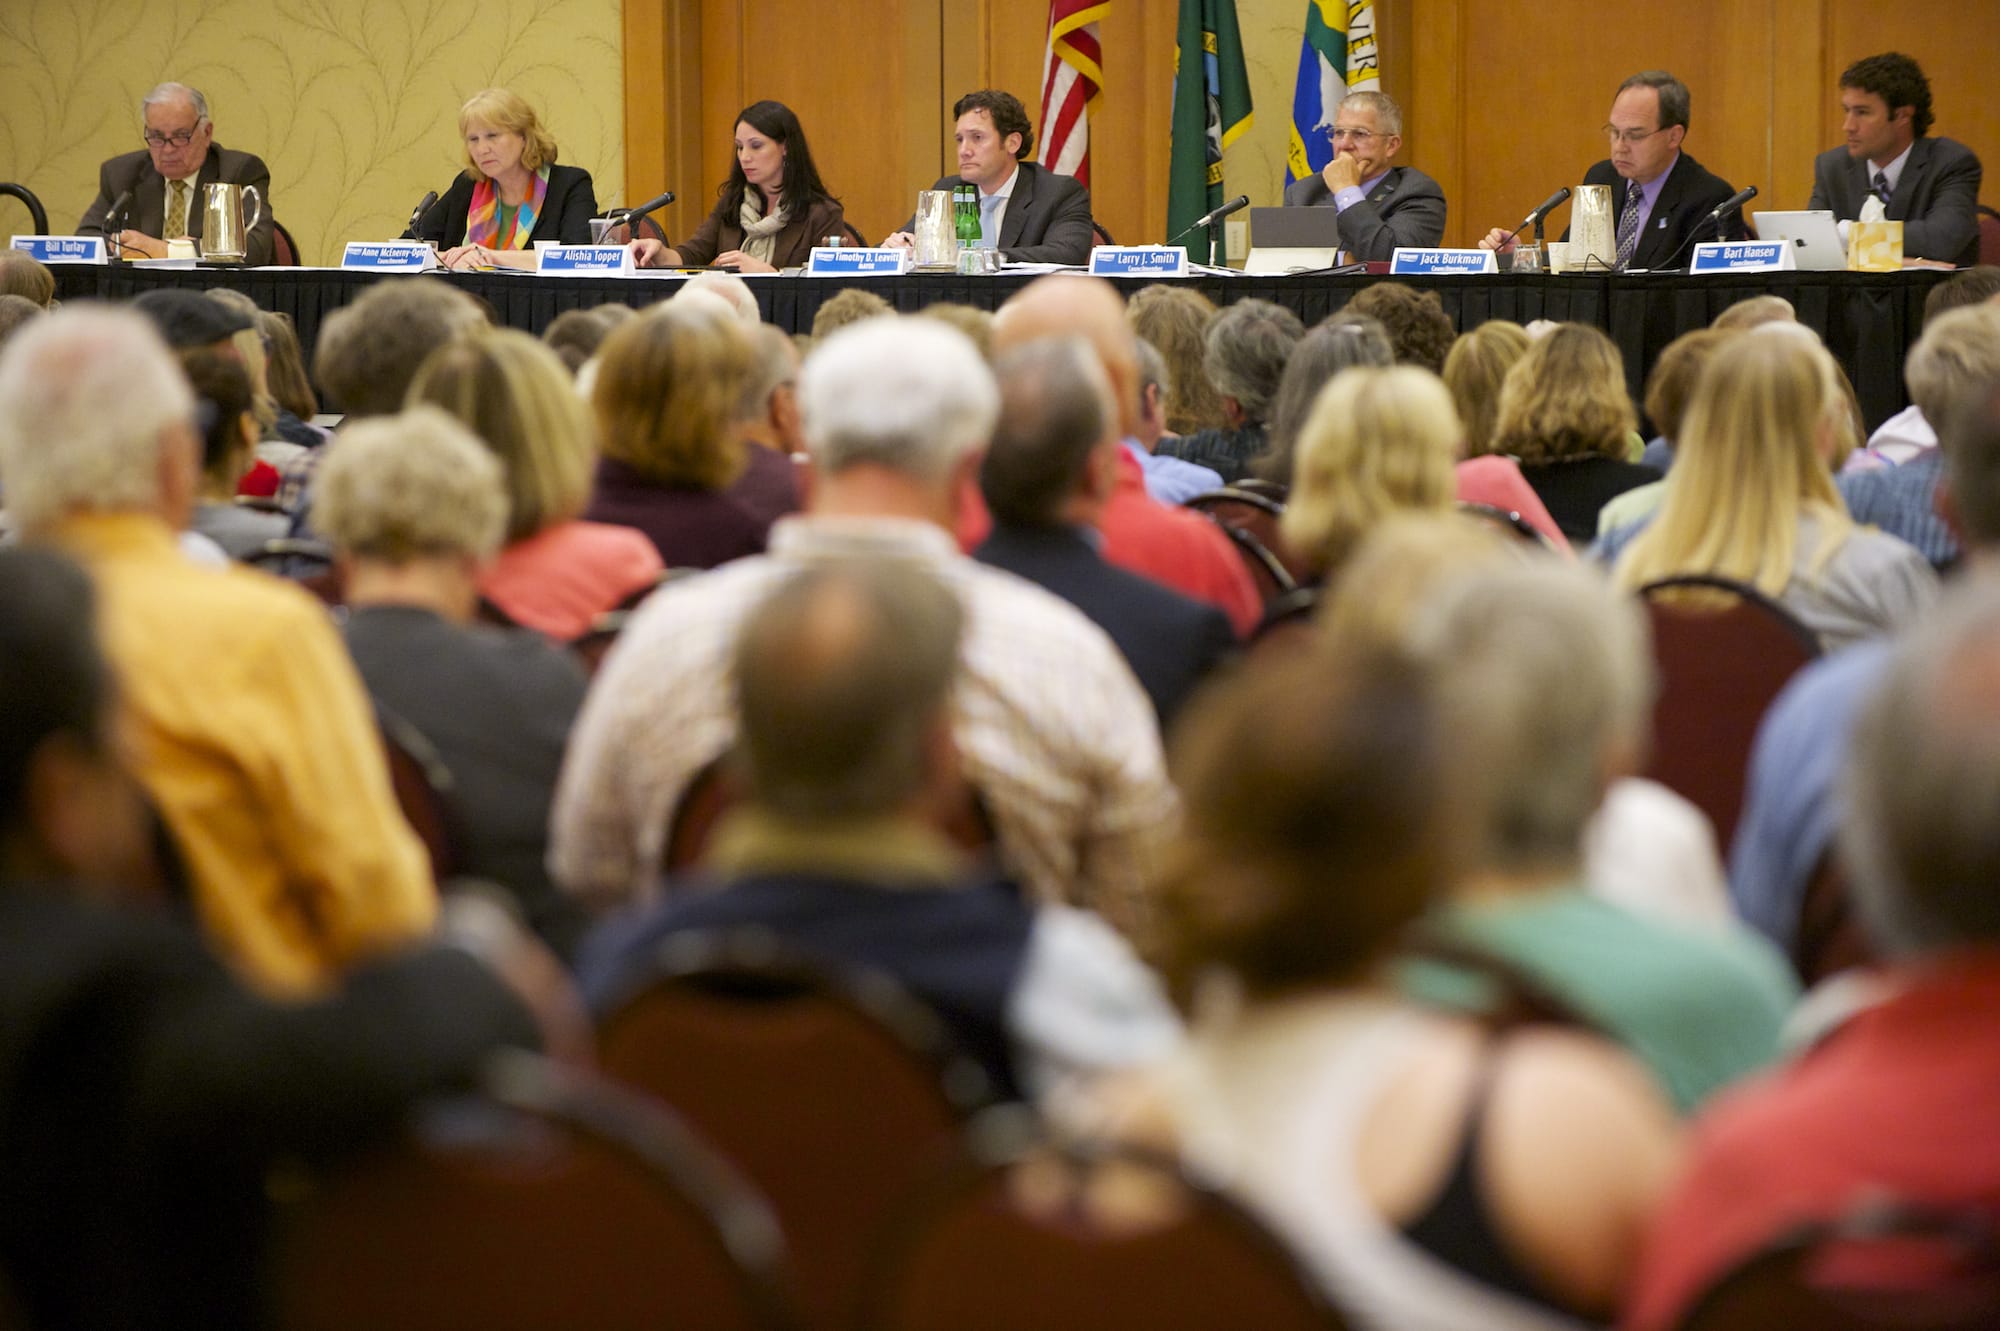 The Vancouver City Council hears public testimony on the proposed Tesoro-Savage oil terminal Monday at the Hilton Vancouver Washington in downtown Vancouver.